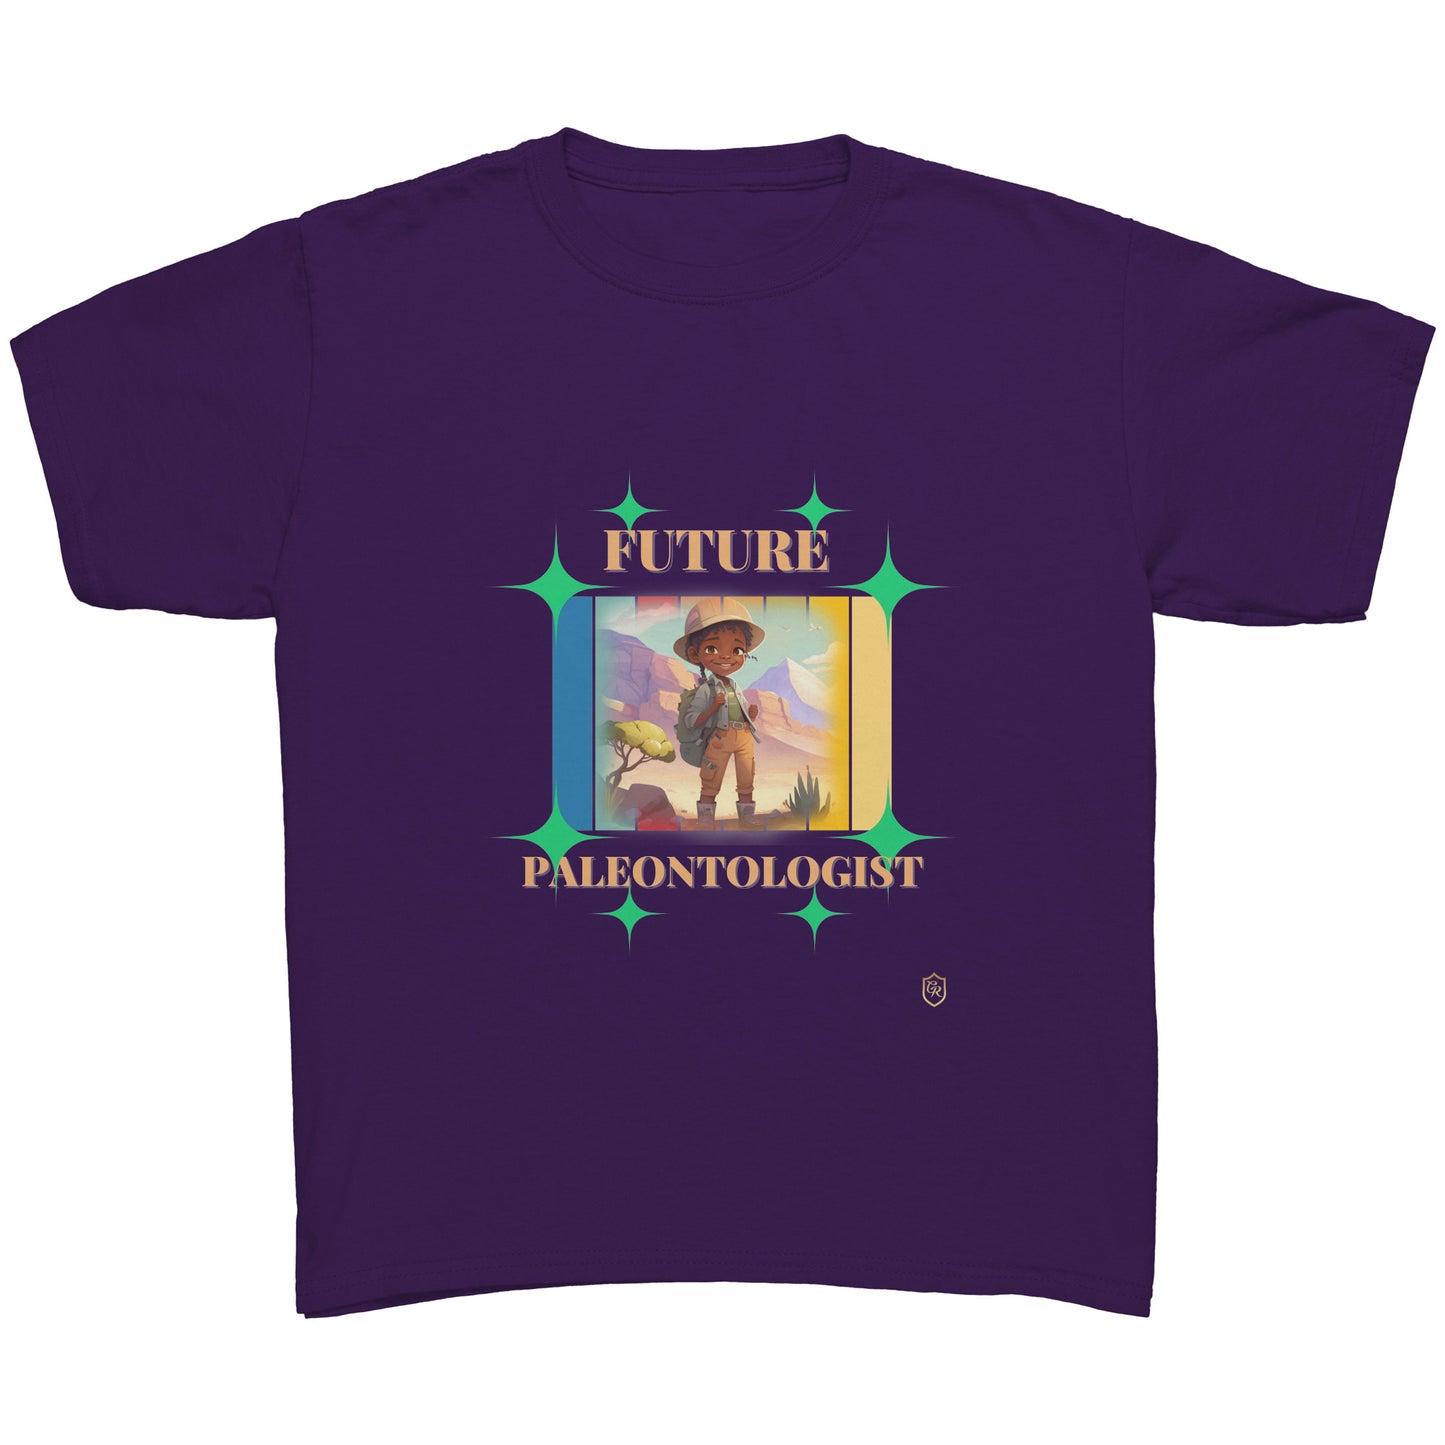 Young Girl's Future Paleontologist T-shirt